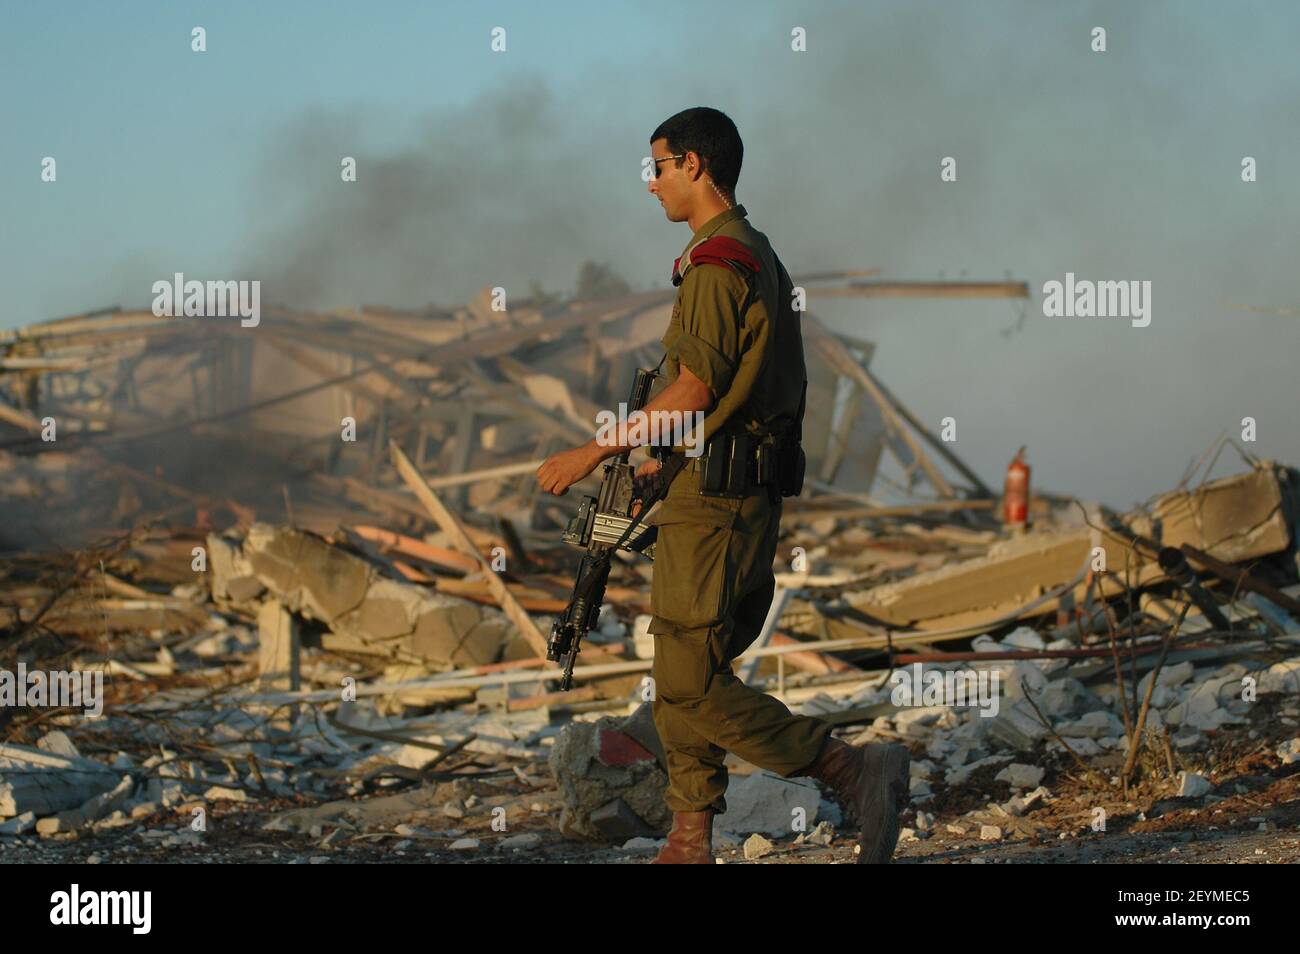 An Israeli soldier walks past mounds of rubble of demolished houses in what used to be the Jewish settlement of Neve Dekalim in Gaza Strip on 06 September 2005. Israel completed the evacuation of all 8,000 Jewish settlers from Gaza and several hundred more from four enclaves in the northern West Bank, after nearly 40 years of occupation. Stock Photo